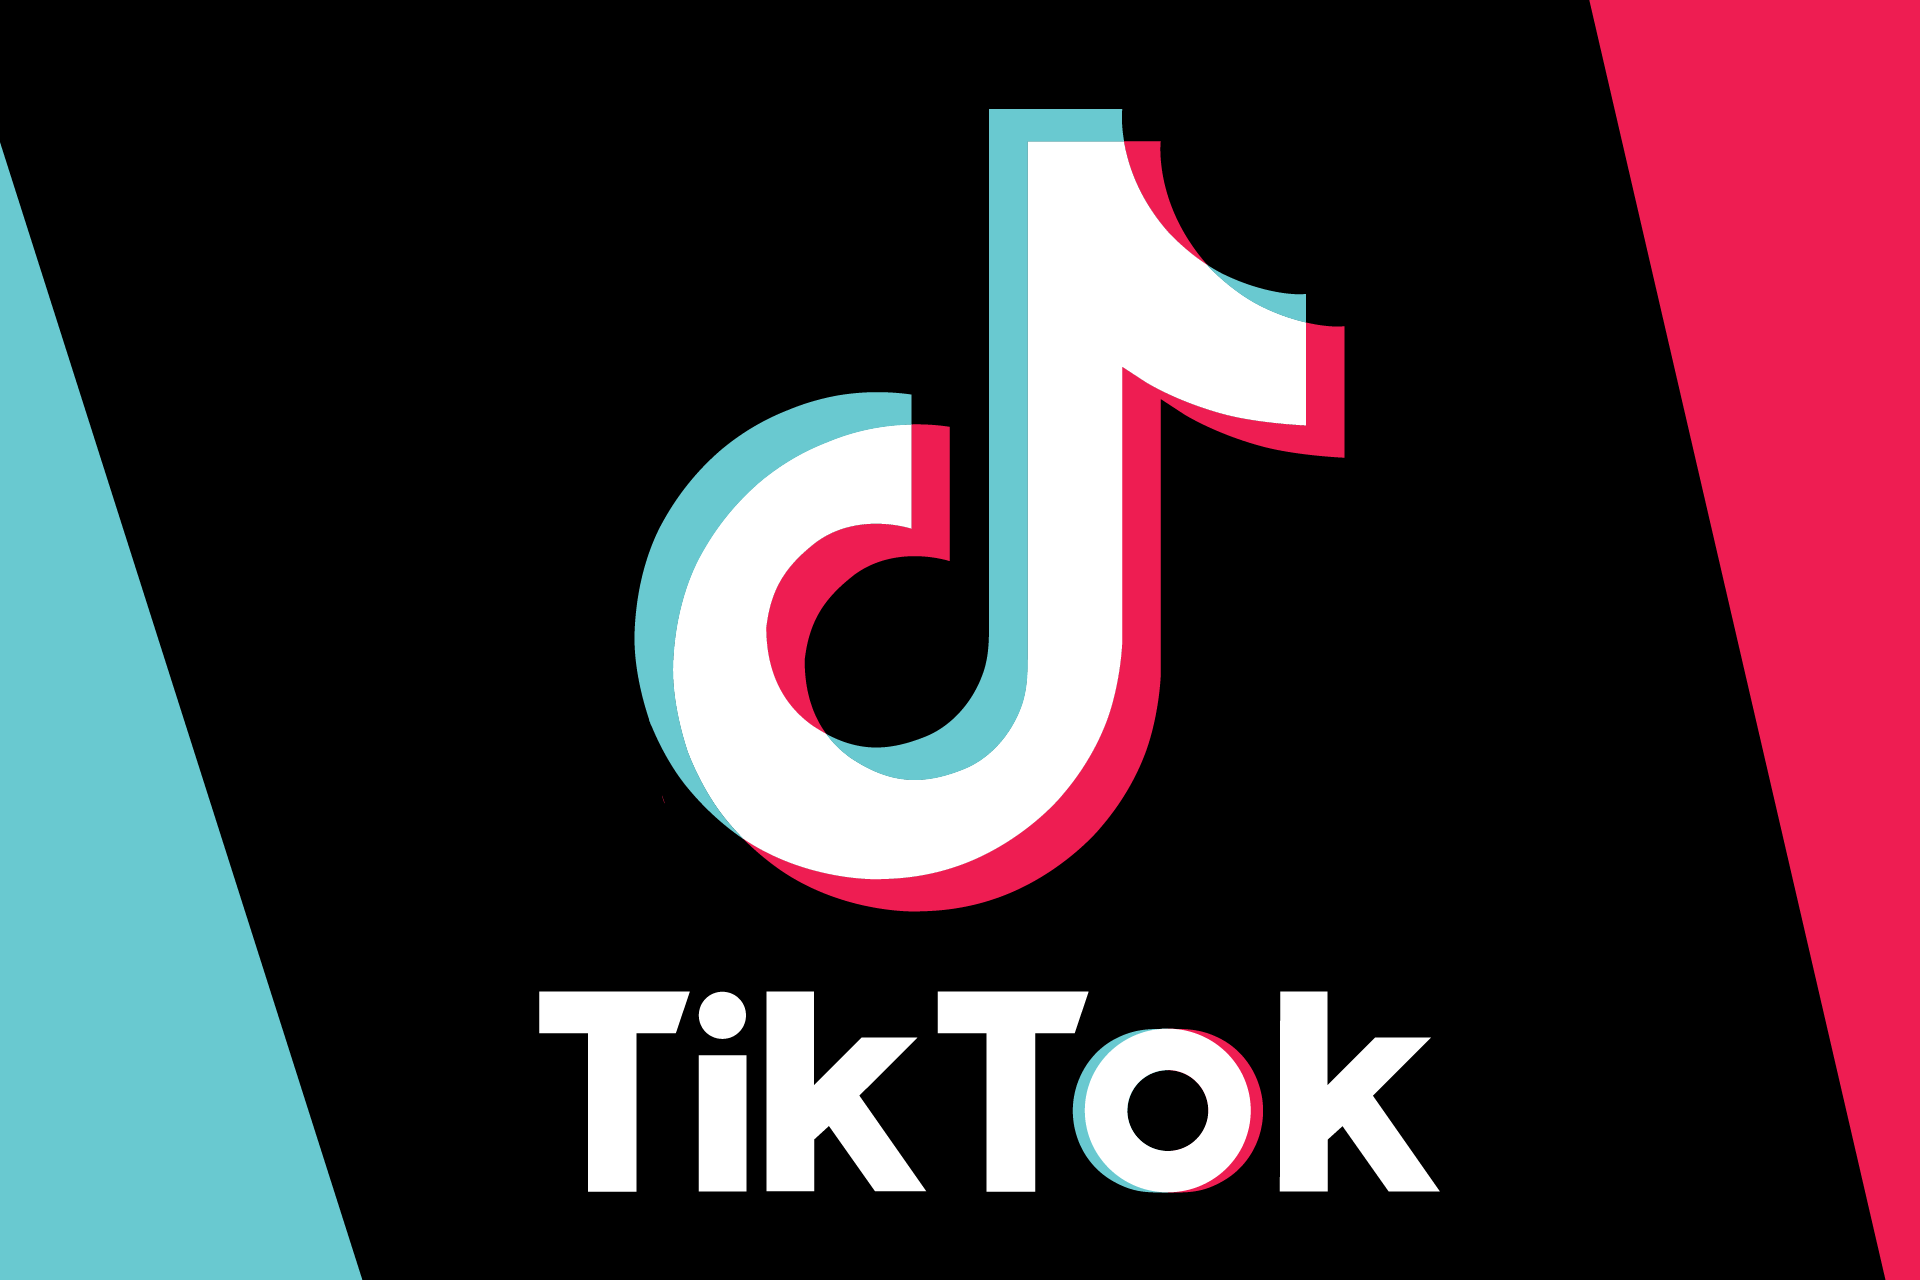 Real Estate Agents: Is it time to join TikTok?